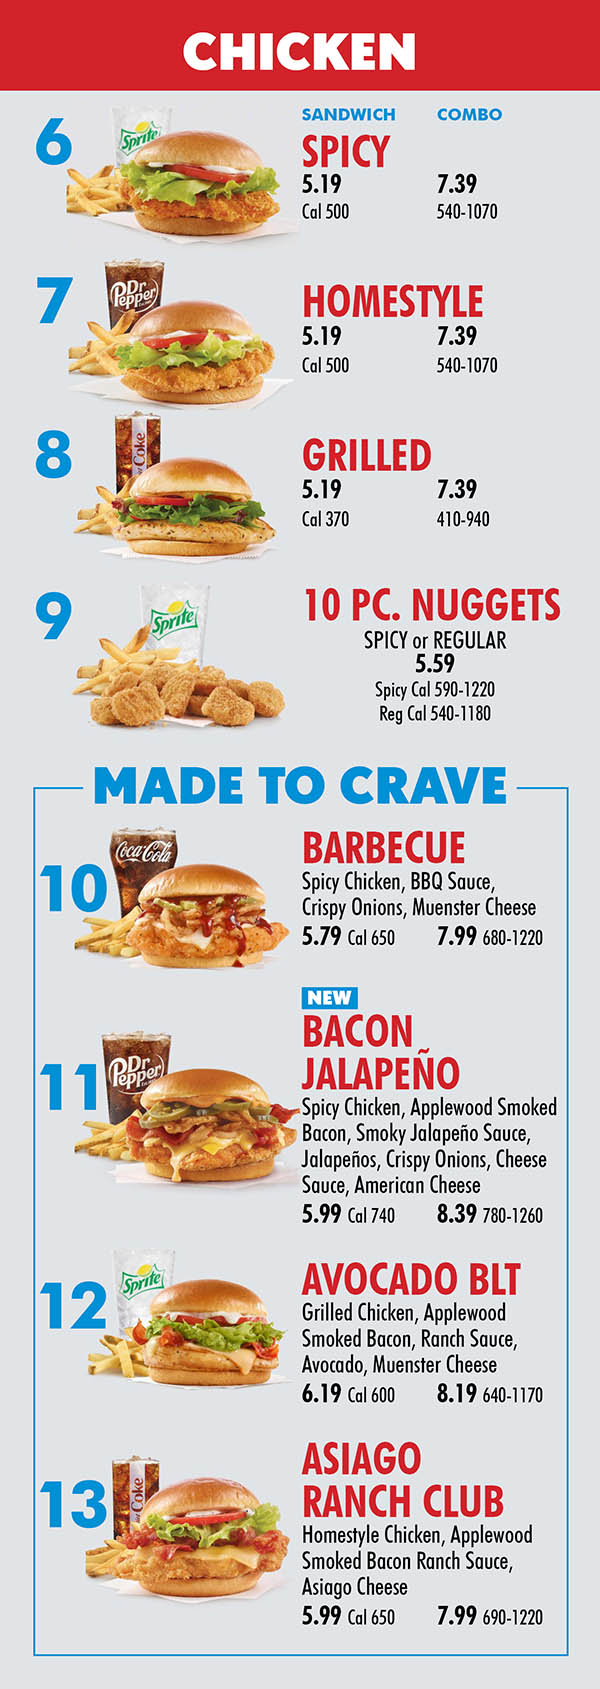 Wendy's Lincoln NE Menu Page 2
CHICKEN
6
MADE TO CRAVE
10
11
12
7
8
SANDWICH COMBO
SPICY
5.19 7.39
Cal 500 540-1070
HOMESTYLE
5.19 7.39
Cal 500 540-1070
GRILLED
5.19 7.39
Cal 370 410-940
10 PC. NUGGETS
SPICY or REGULAR
5.59
Spicy Cal 590-1220
Reg Cal 540-1180
BARBECUE
Spicy Chicken, BBQ Sauce,
Crispy Onions, Muenster Cheese
5.79 Cal 650 7.99 680-1220
BACON
JALAPEÑO
Spicy Chicken, Applewood Smoked Bacon, Smoky Jalapeño Sauce, Jalapeños, Crispy Onions, Cheese Sauce, American Cheese
5.99 Cal 740 8.39 780-1260
AVOCADO BLT
Grilled Chicken, Applewood
Smoked Bacon, Ranch Sauce,
Avocado, Muenster Cheese
6.19 Cal 600 8.19 640-1170
ASIAGO
RANCH CLUB
Homestyle Chicken, Applewood
Smoked Bacon Ranch Sauce,
Asiago Cheese
5.99 Cal 650 7.99 690-1220